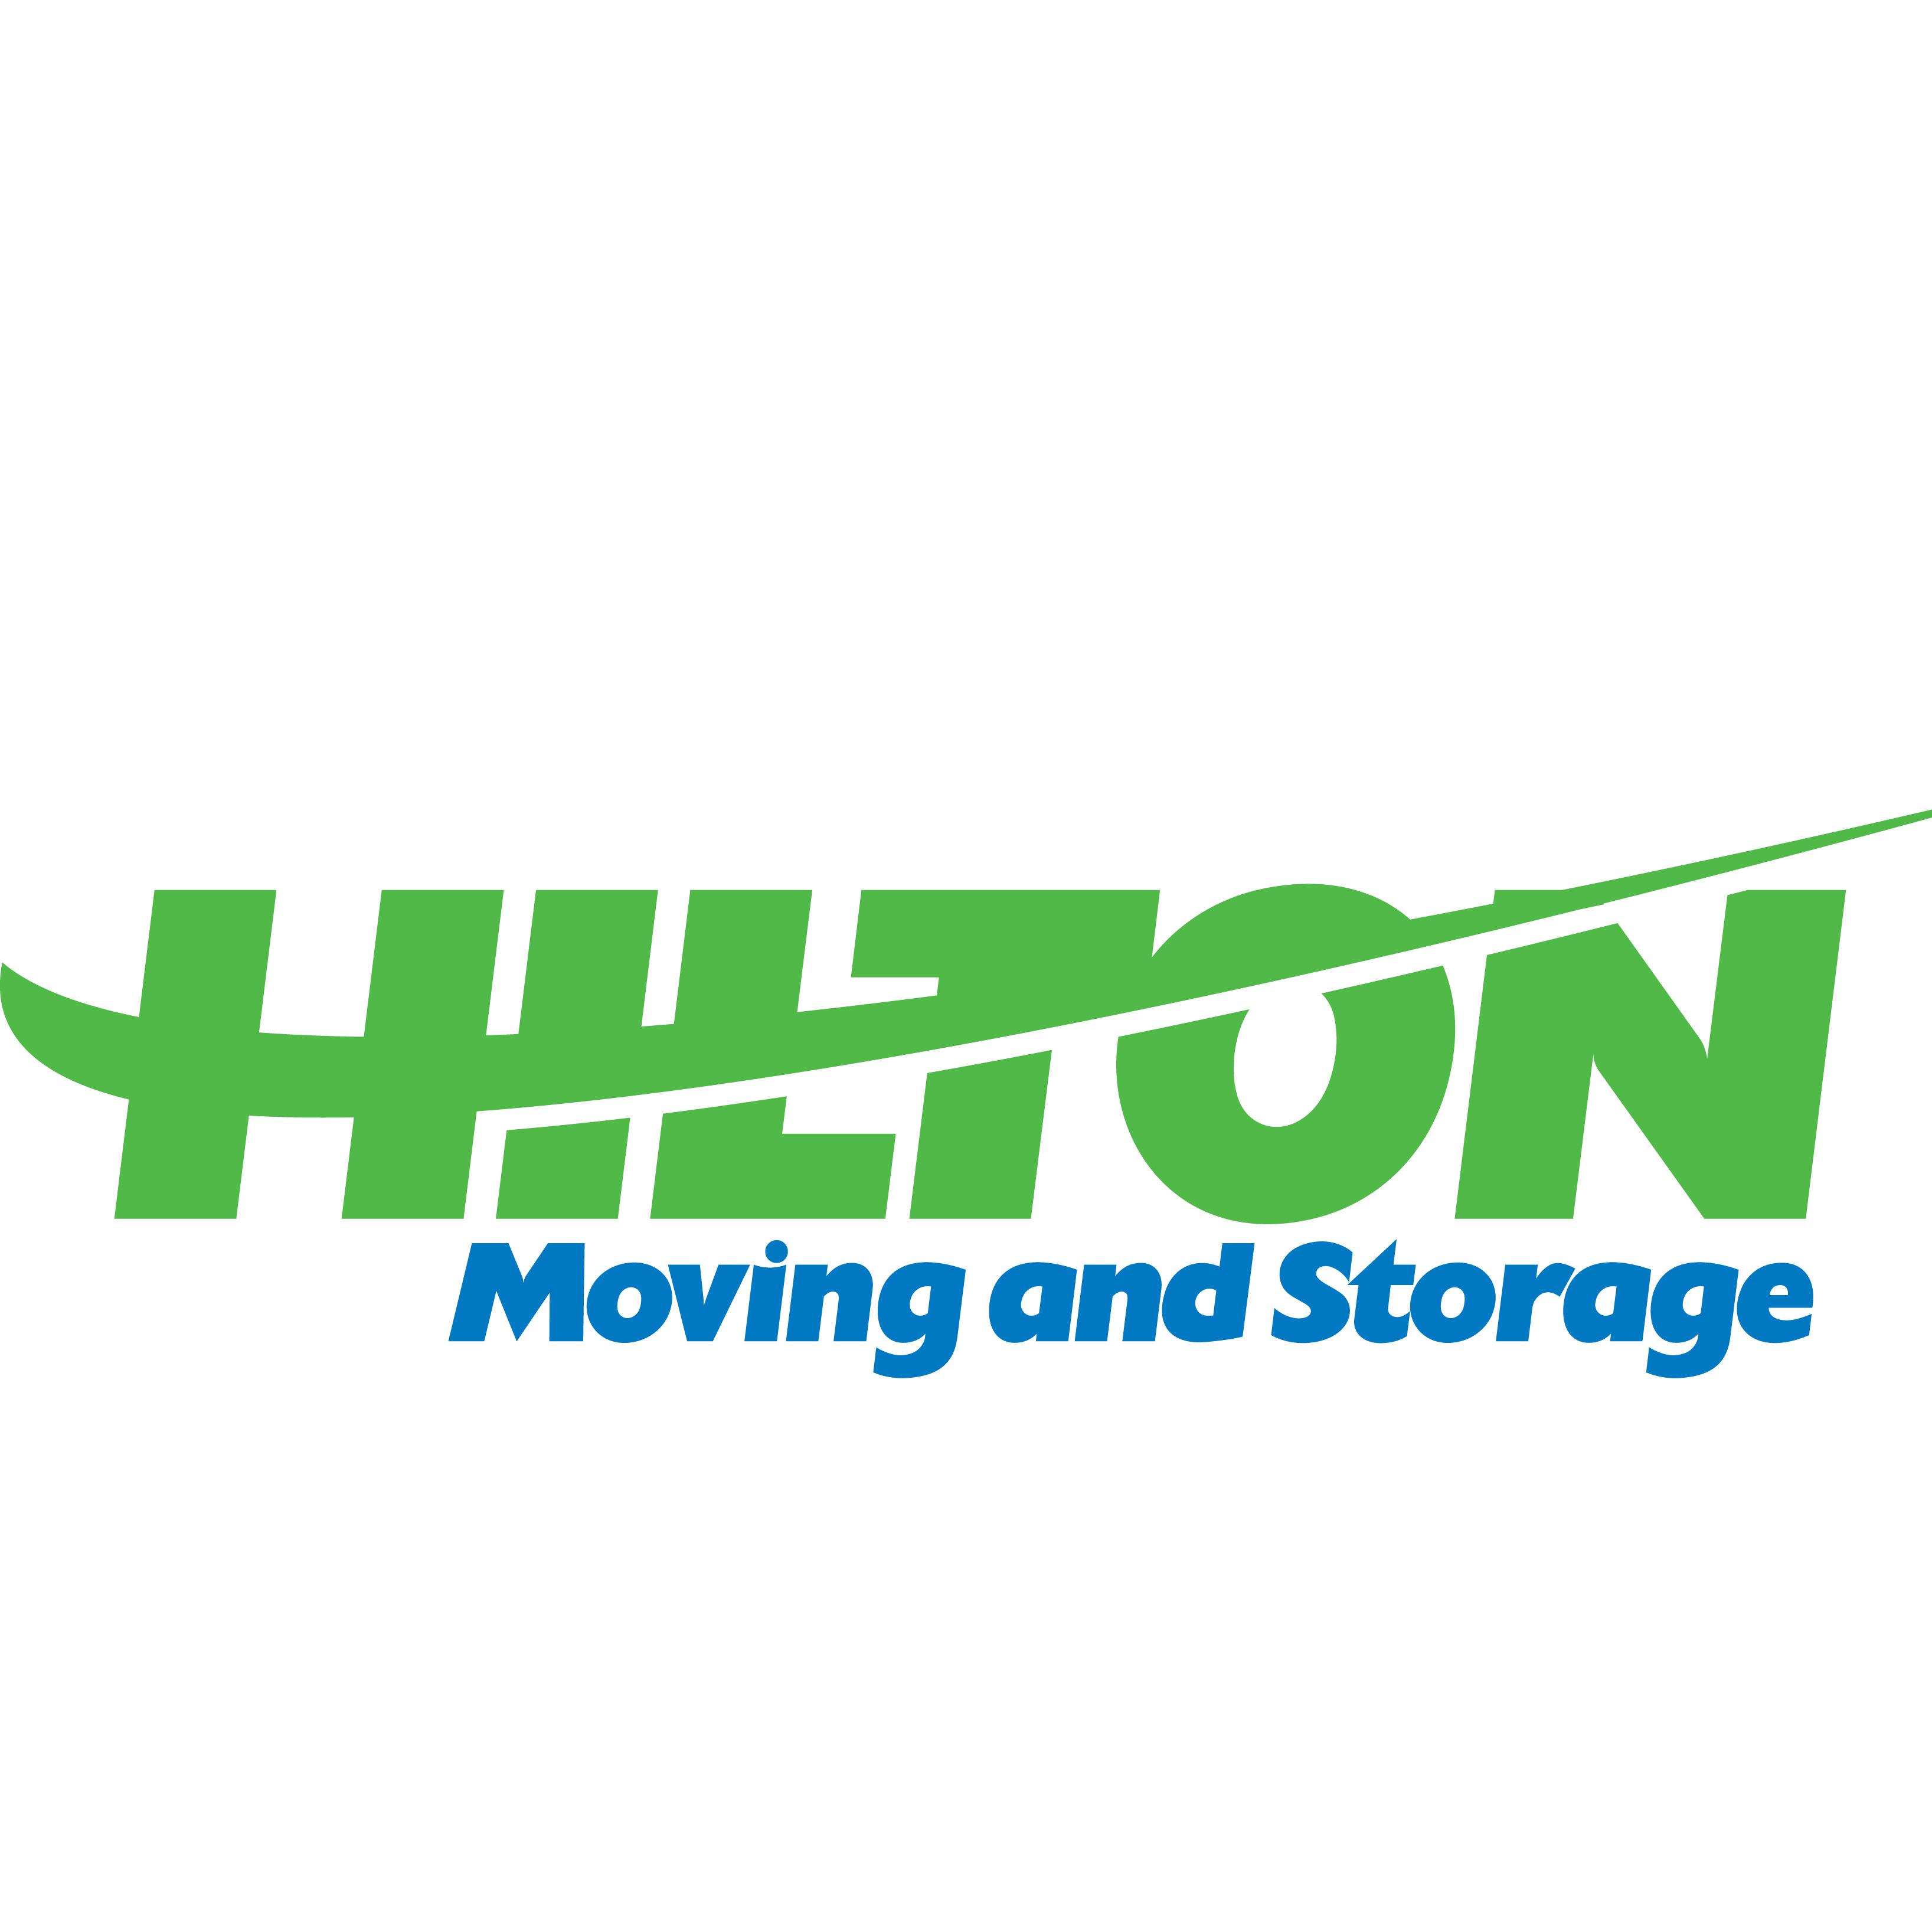 Hilton Moving and Storage